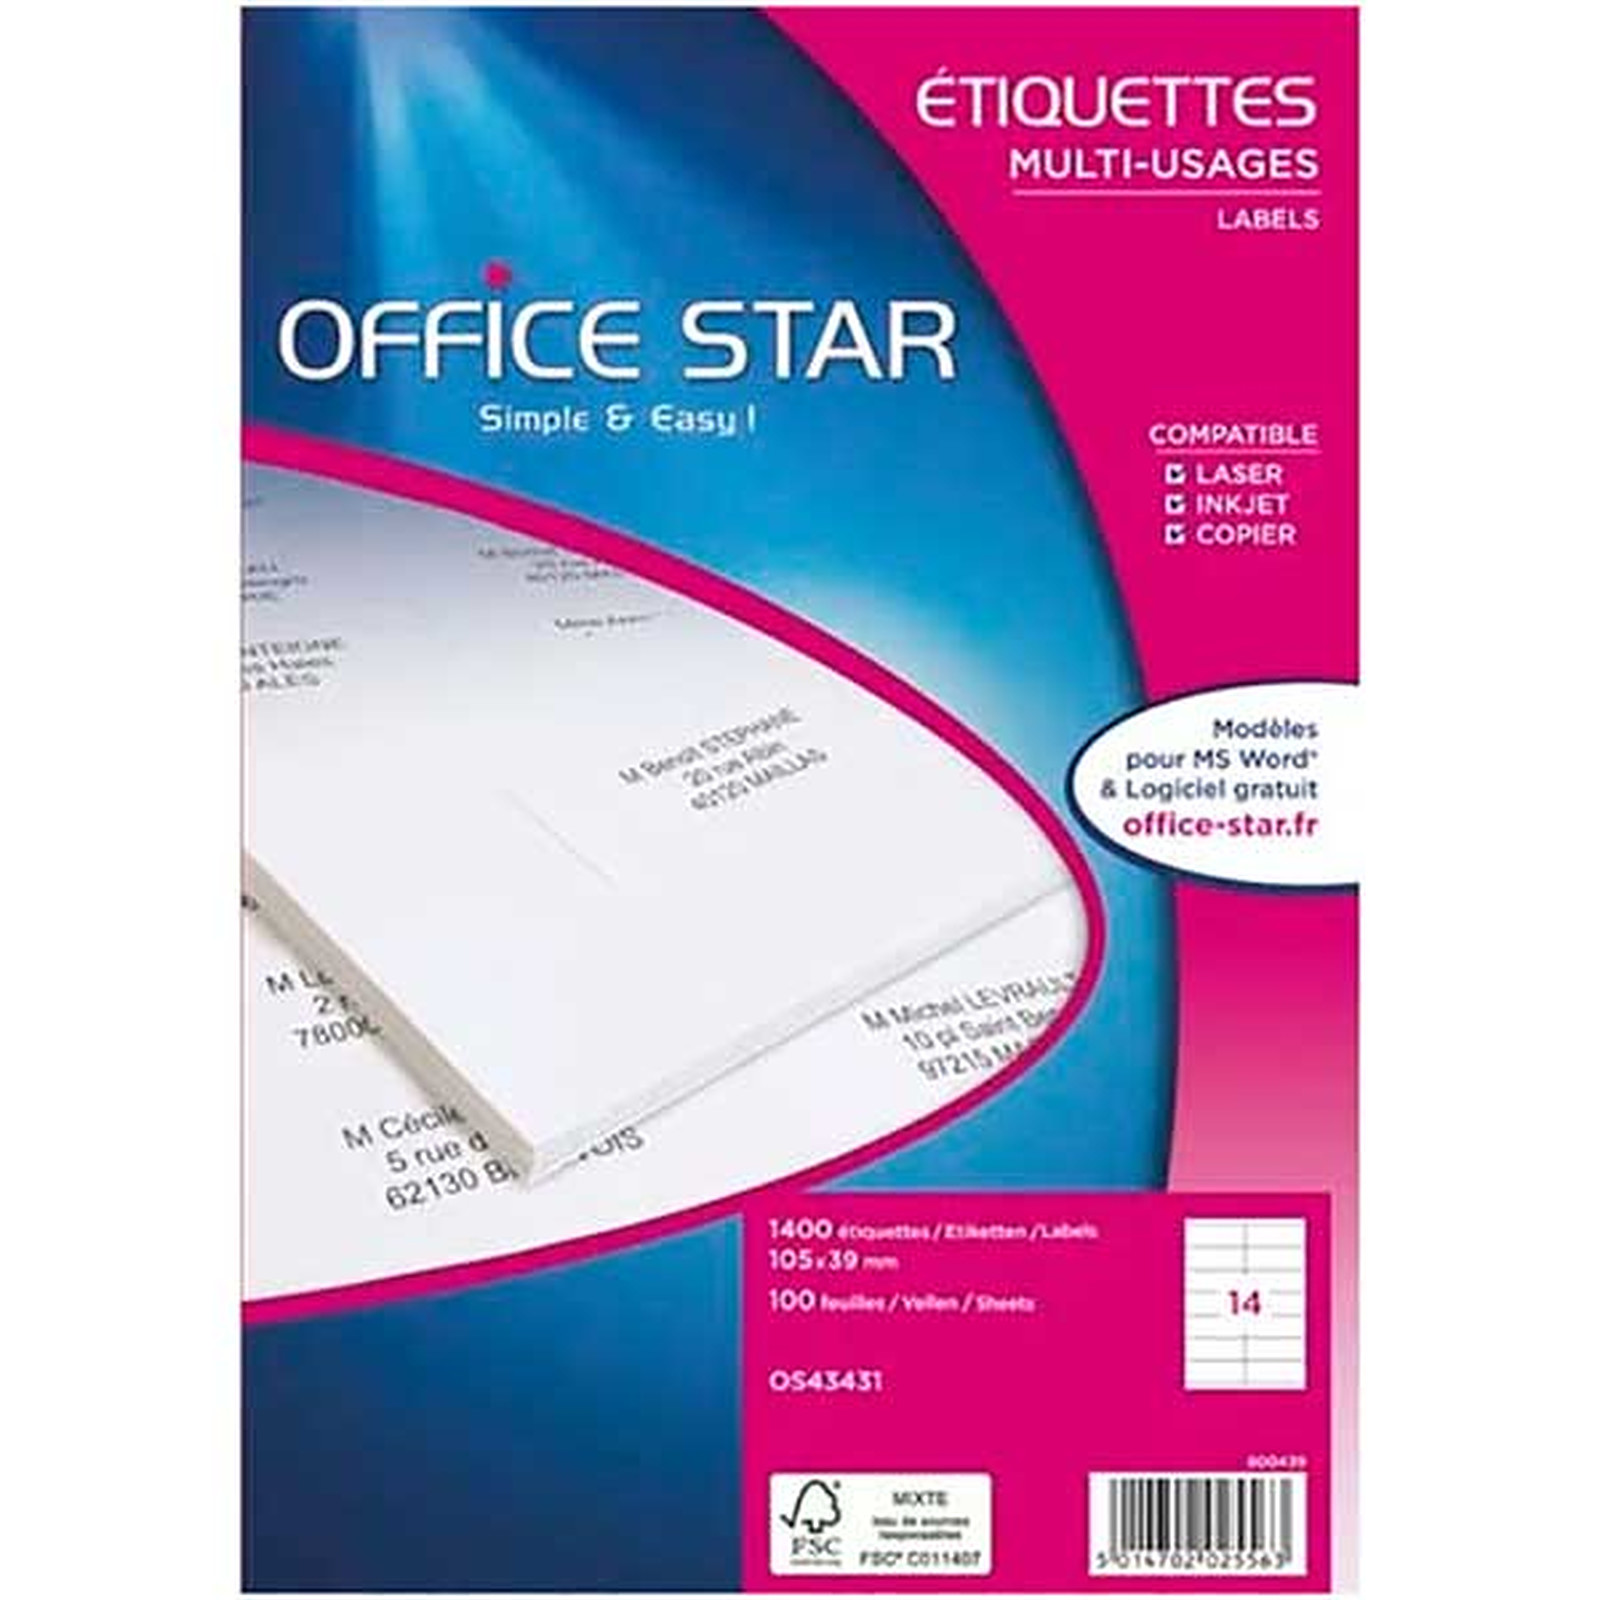 Office Star Etiquettes multi-usage blanches 97 x 42.3 mm x 1200 - Etiquette Office Star